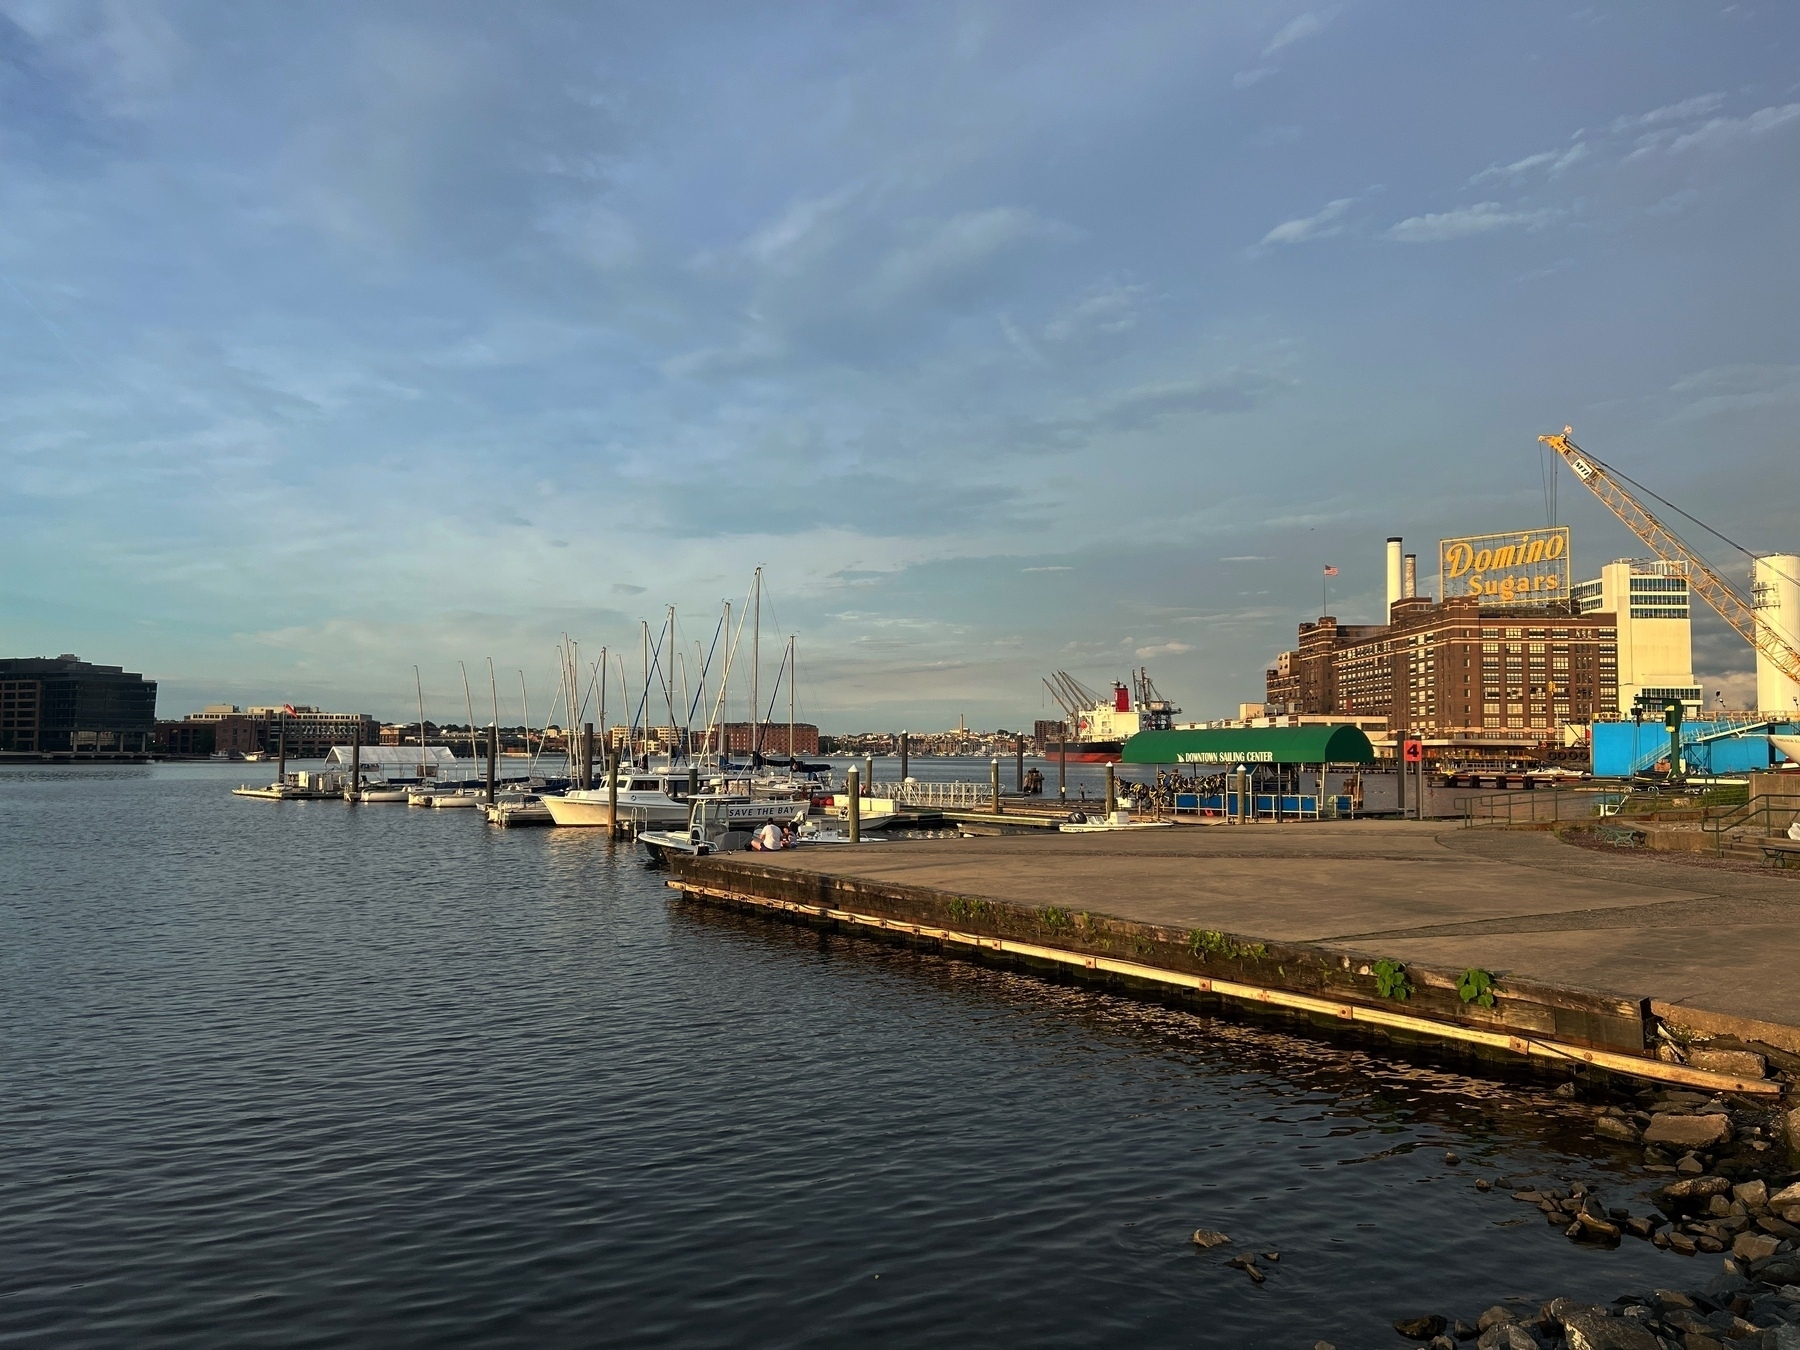 View of Domino Sugar sign looking at the Baltimore Harbor from the Museum of Industry just a little before the golden hour.